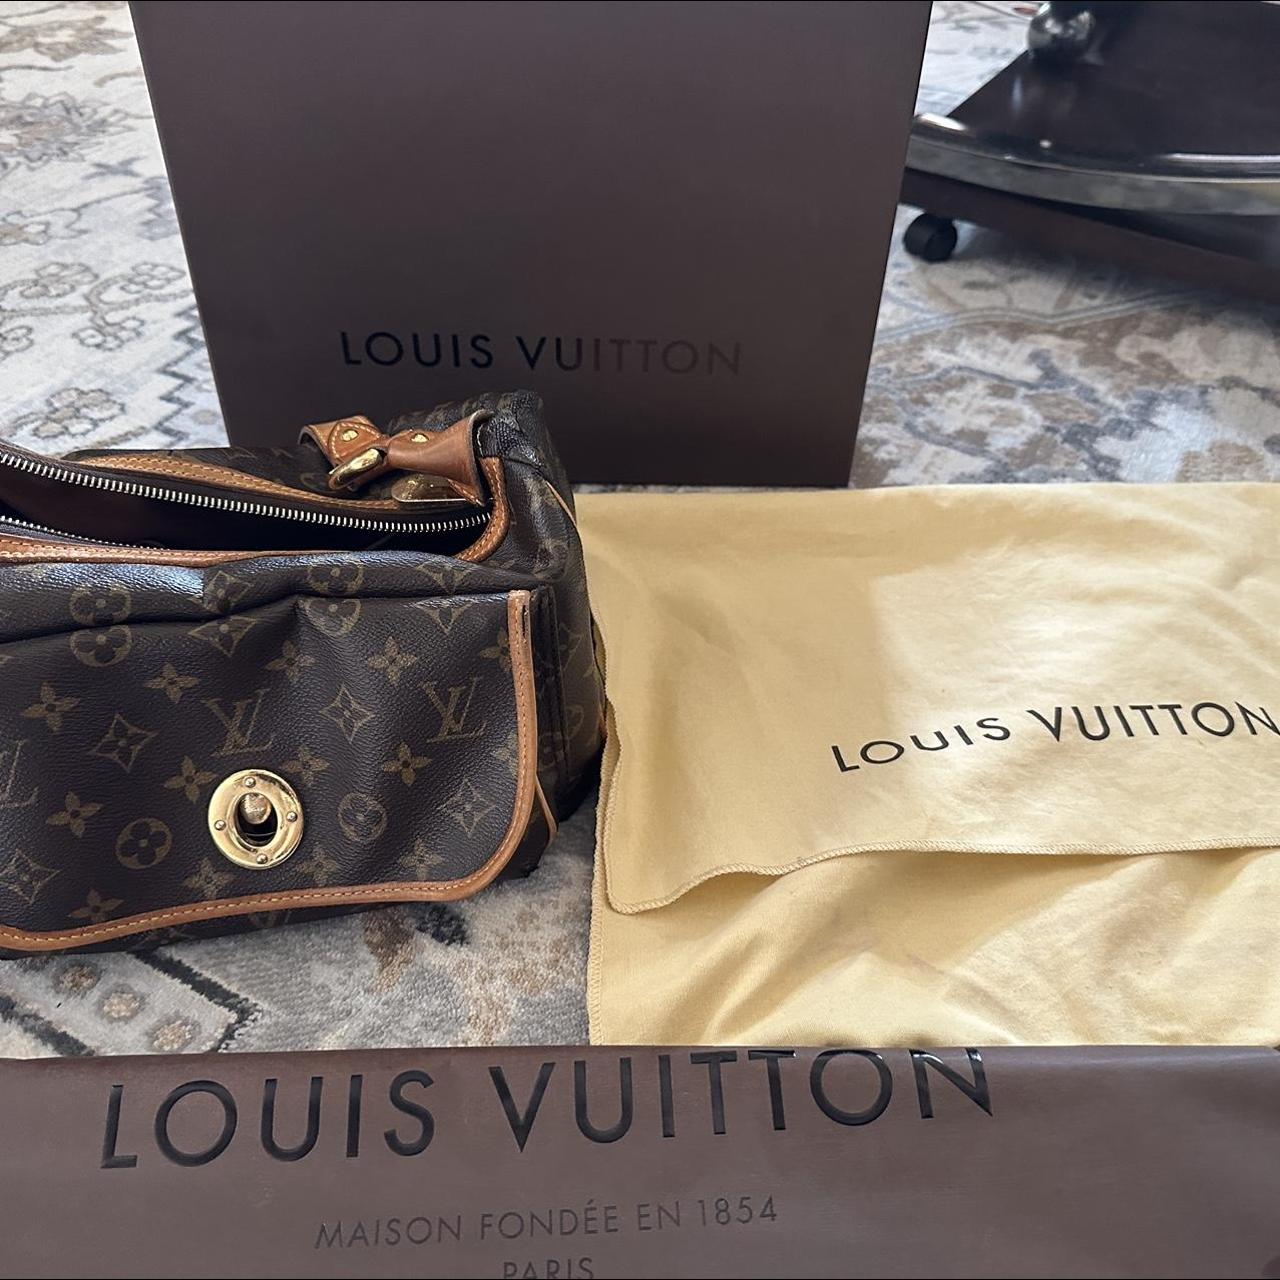 Authentic Louis Vuitton shopping bag. In great - Depop